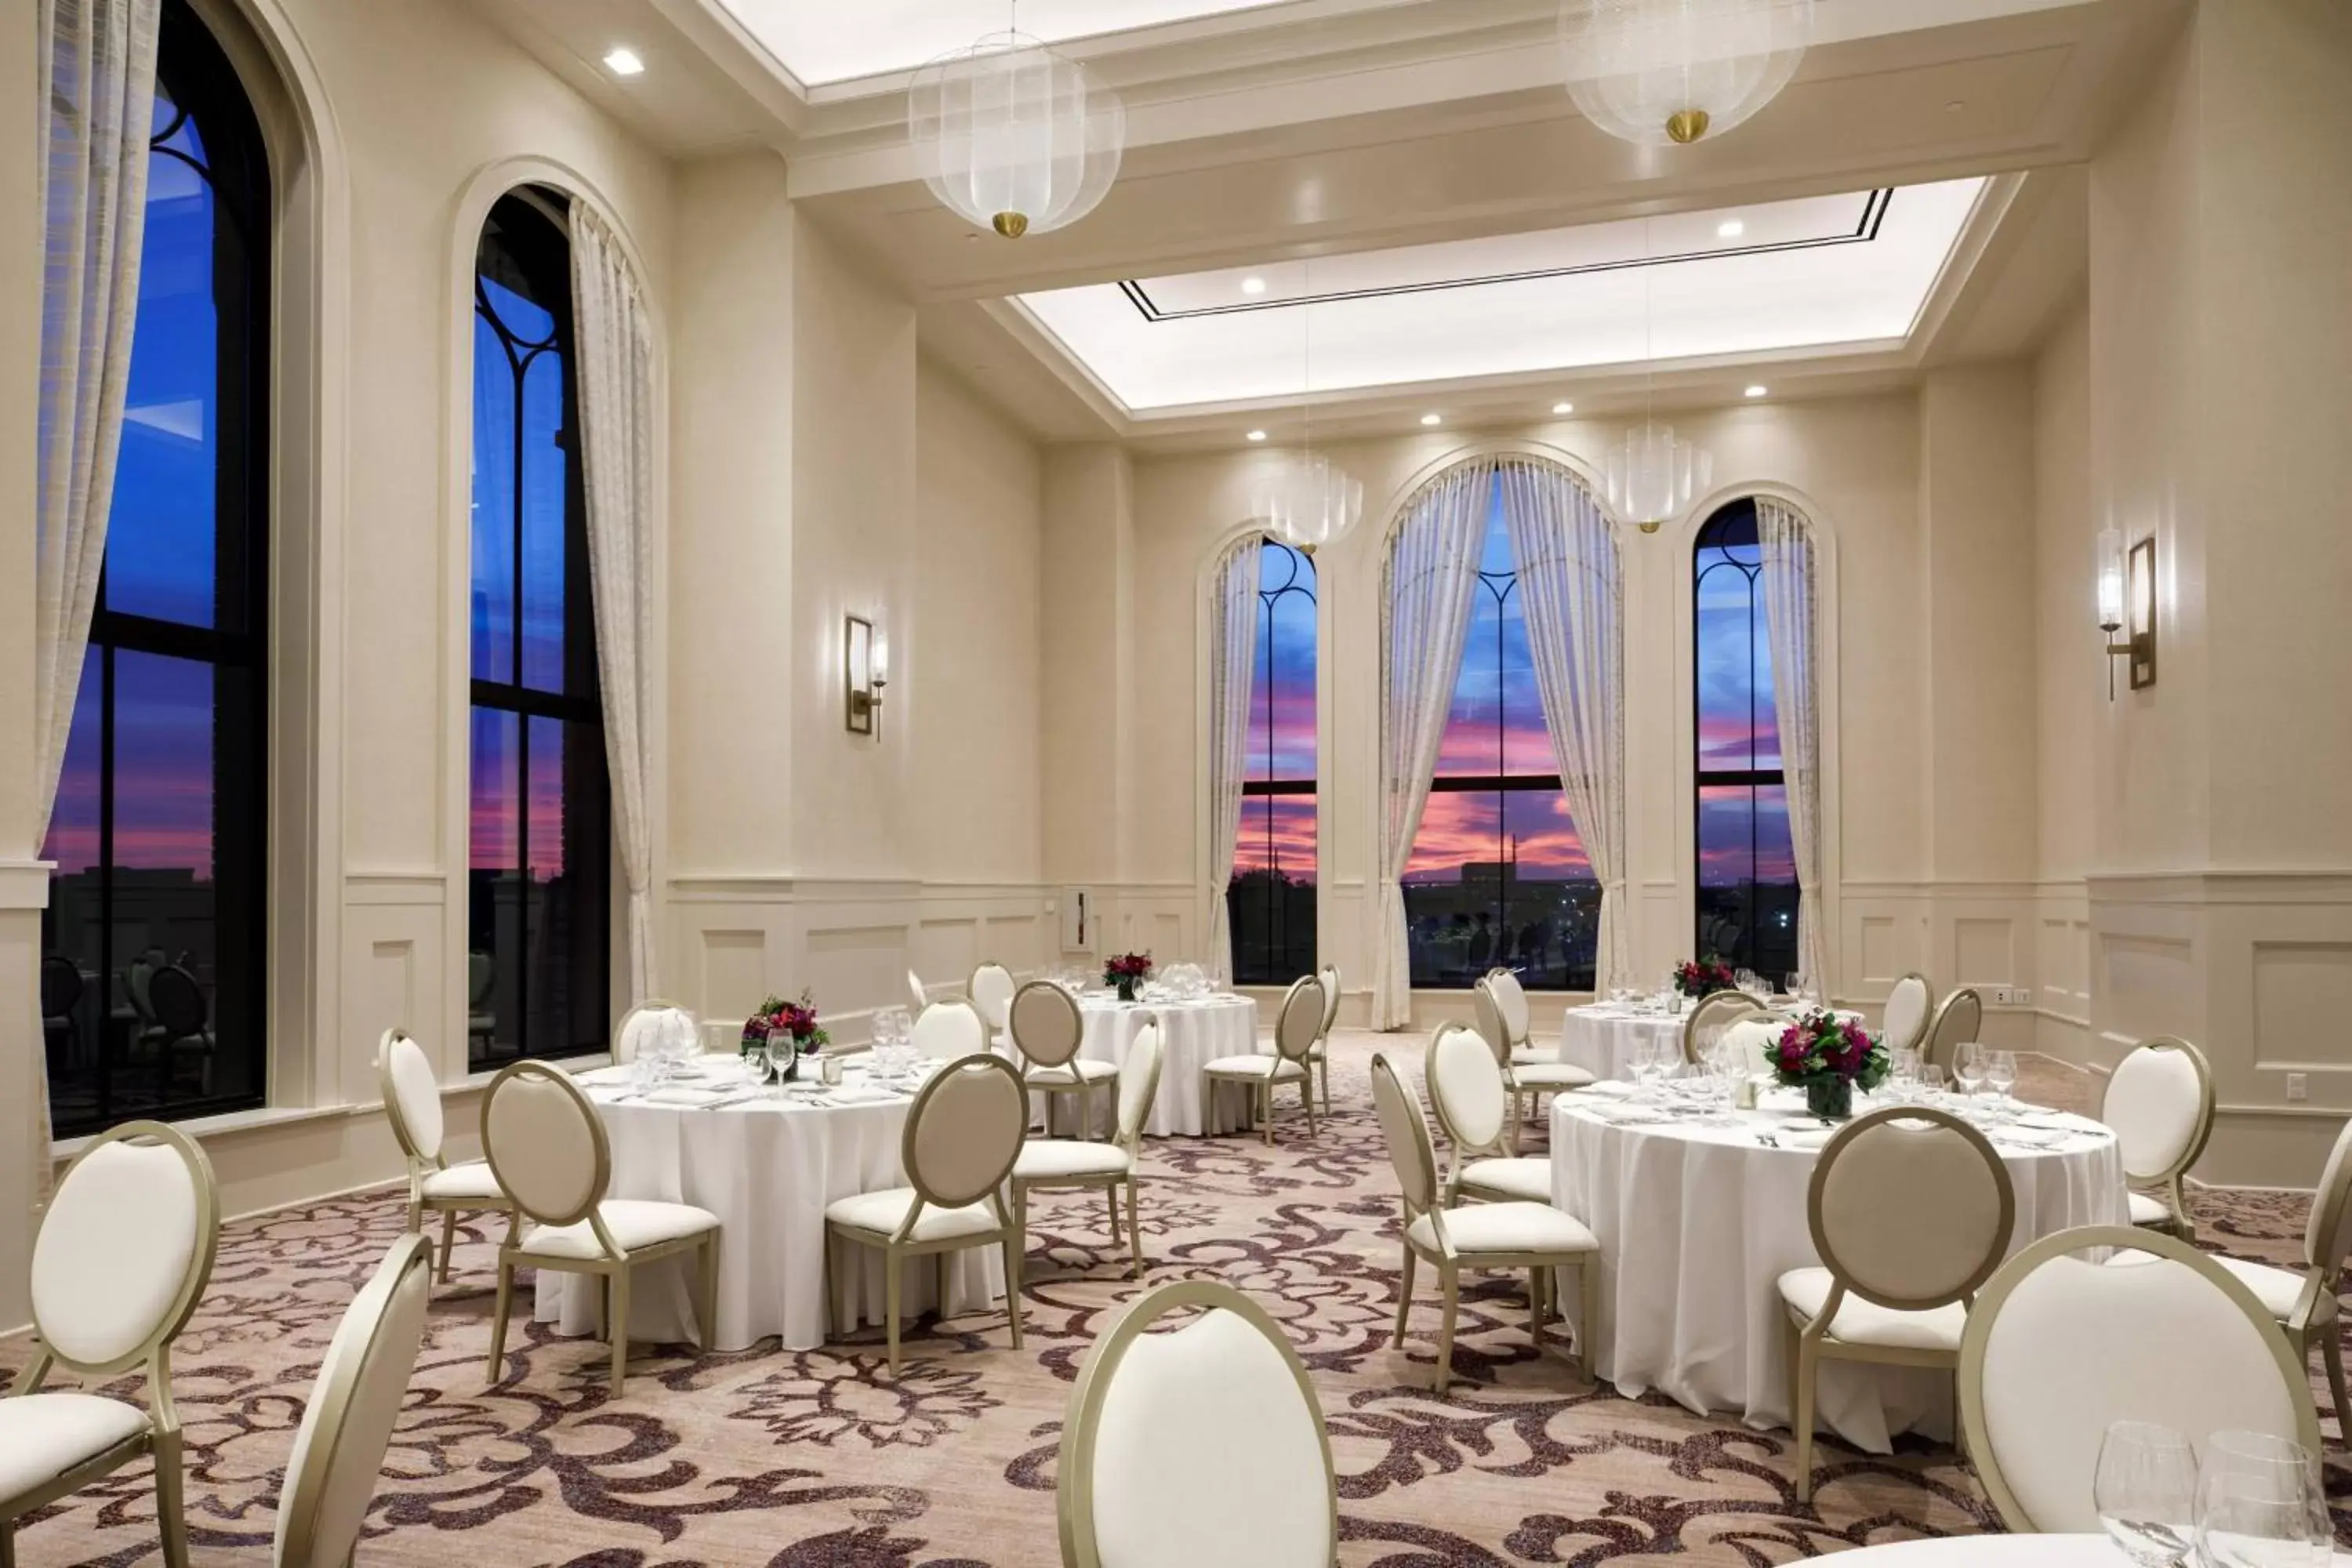 Meeting/conference room, Banquet Facilities in Hotel Vin, Autograph Collection